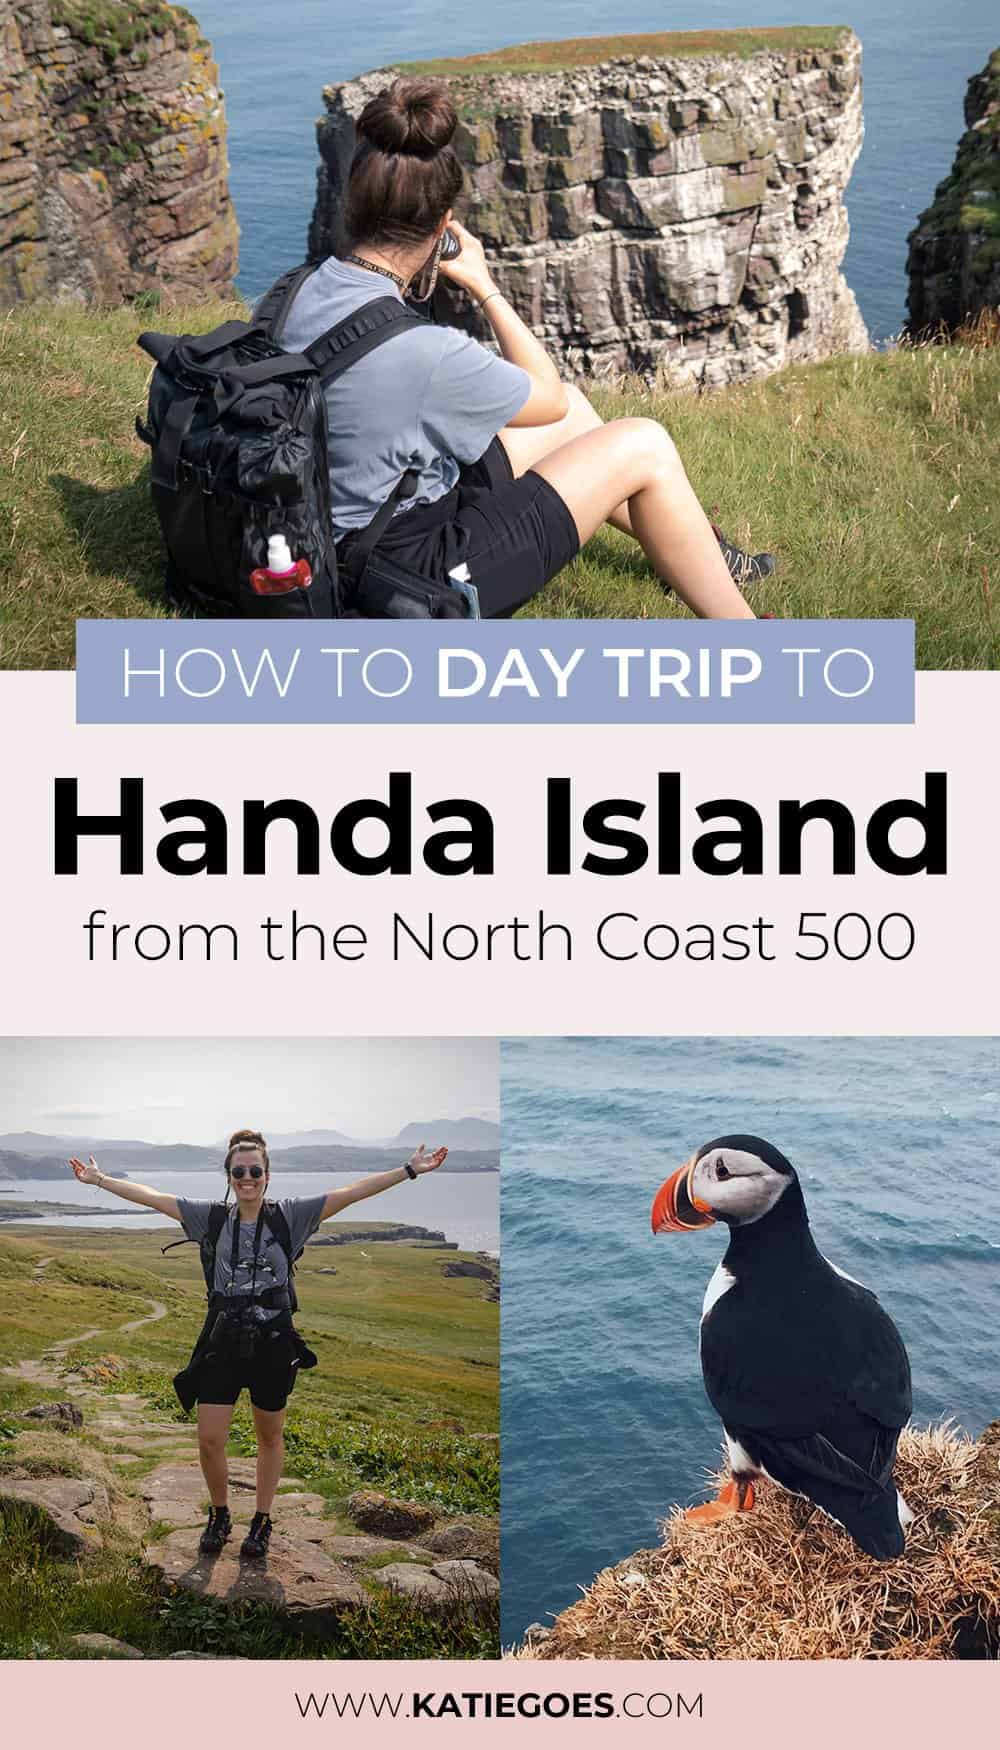 How to Day Trip to Handa Island from the North Coast 500